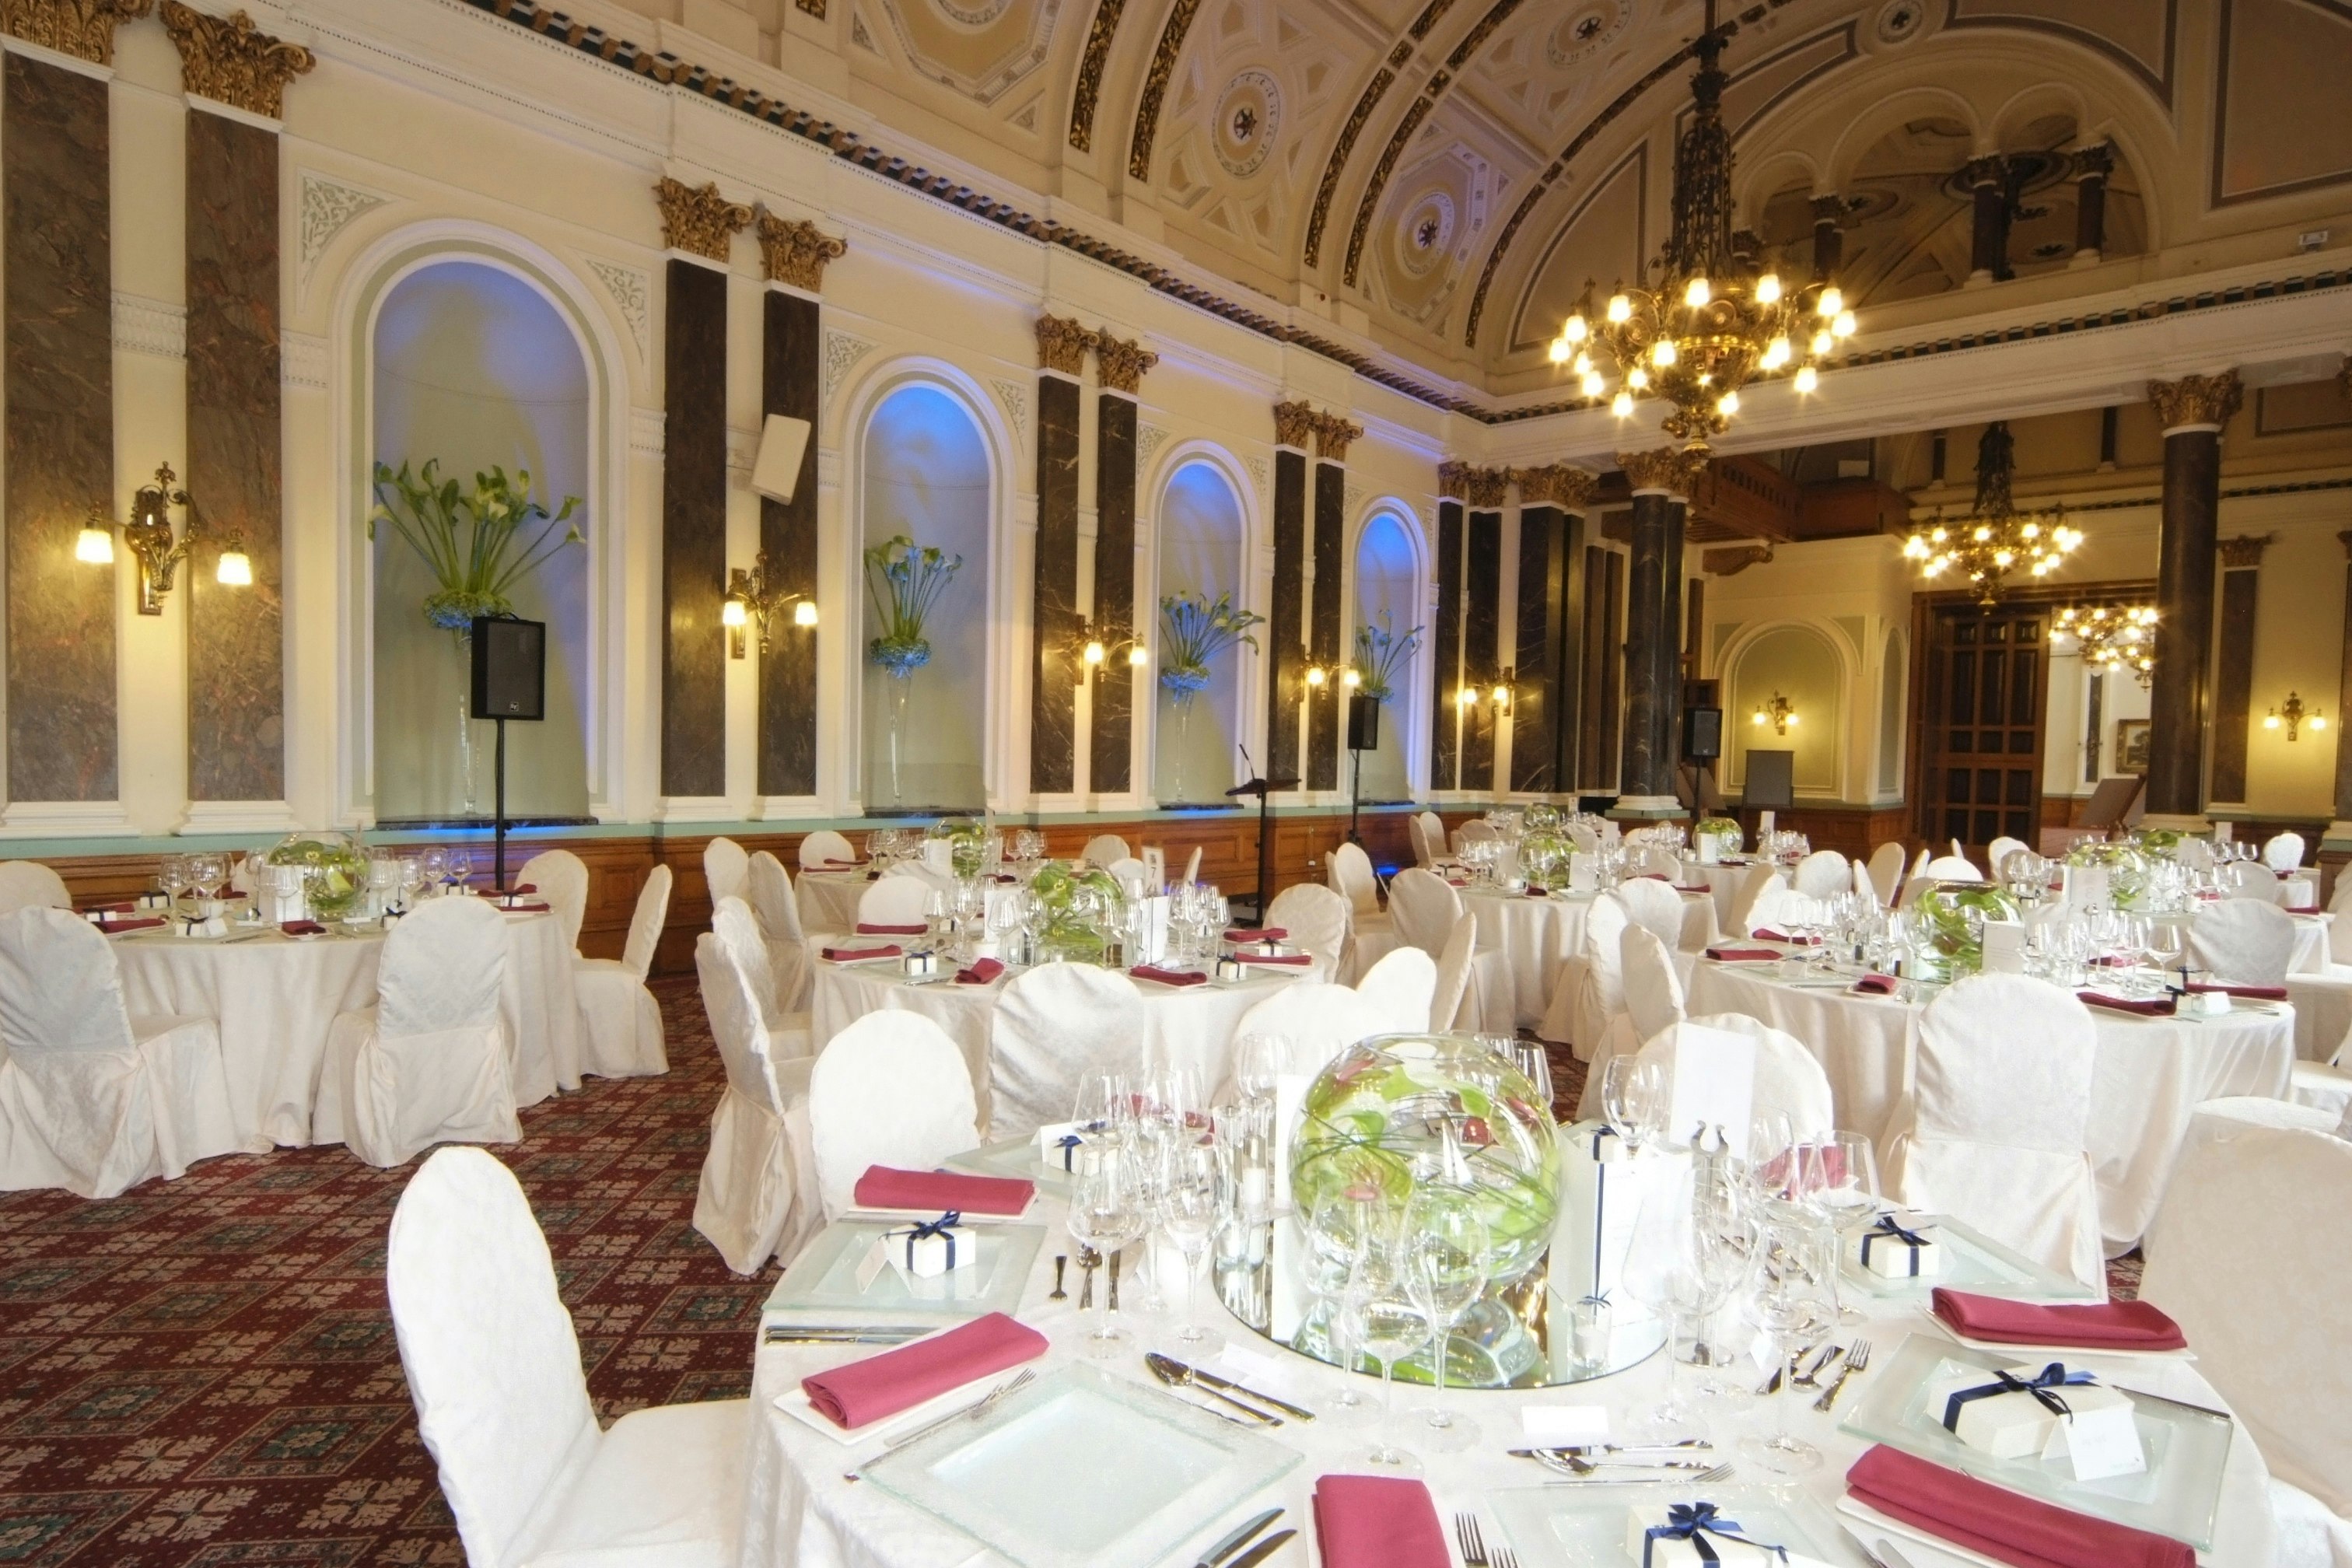 Awards Ceremony Venues in Birmingham - The Council House - Business in Banqueting Suite - Banner